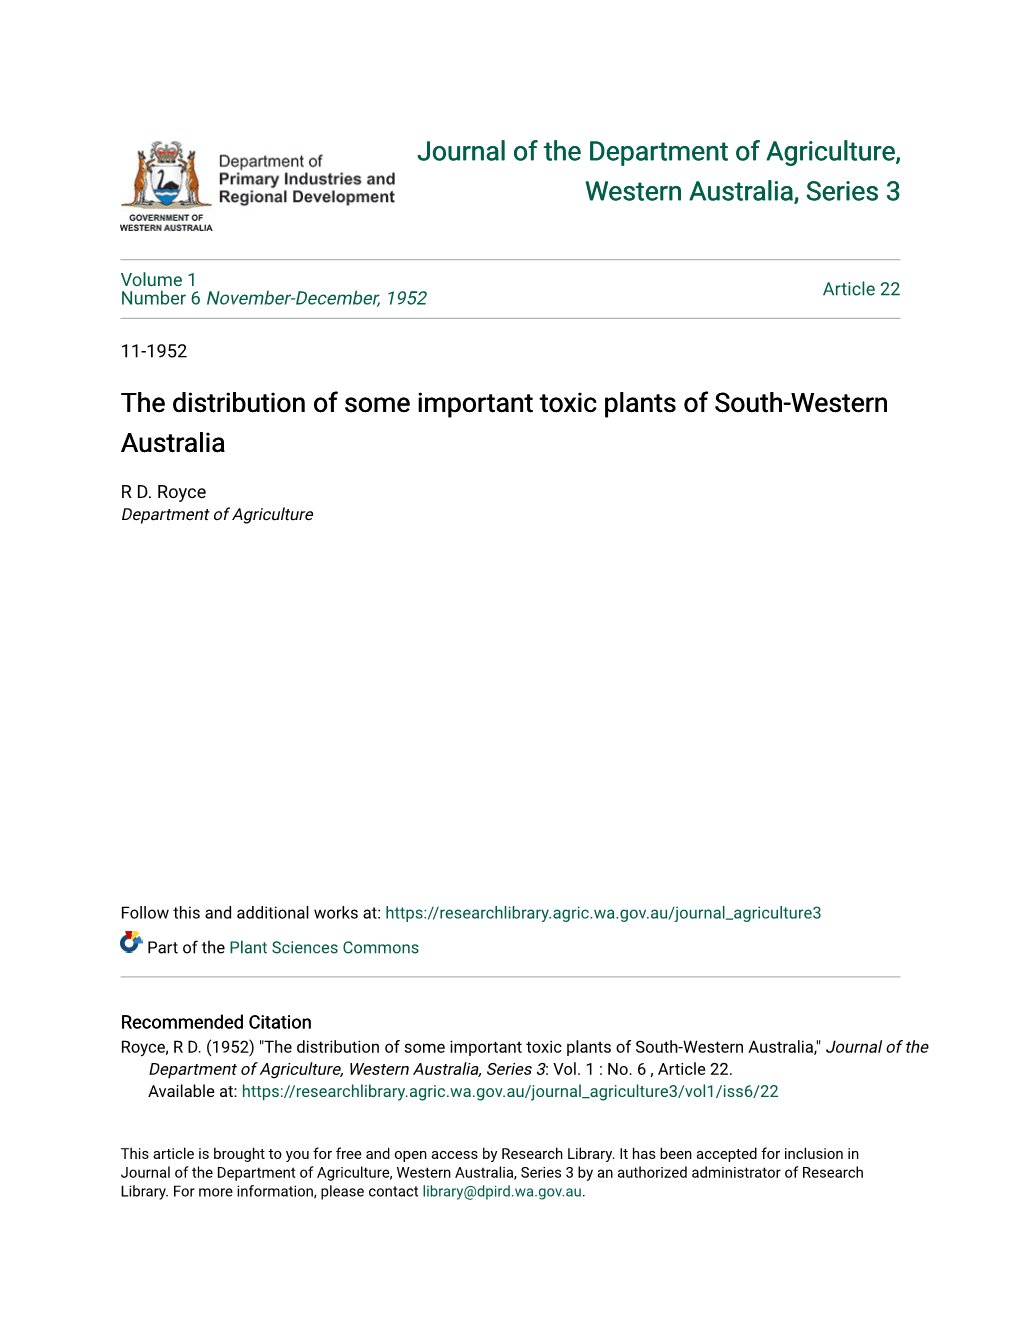 The Distribution of Some Important Toxic Plants of South-Western Australia